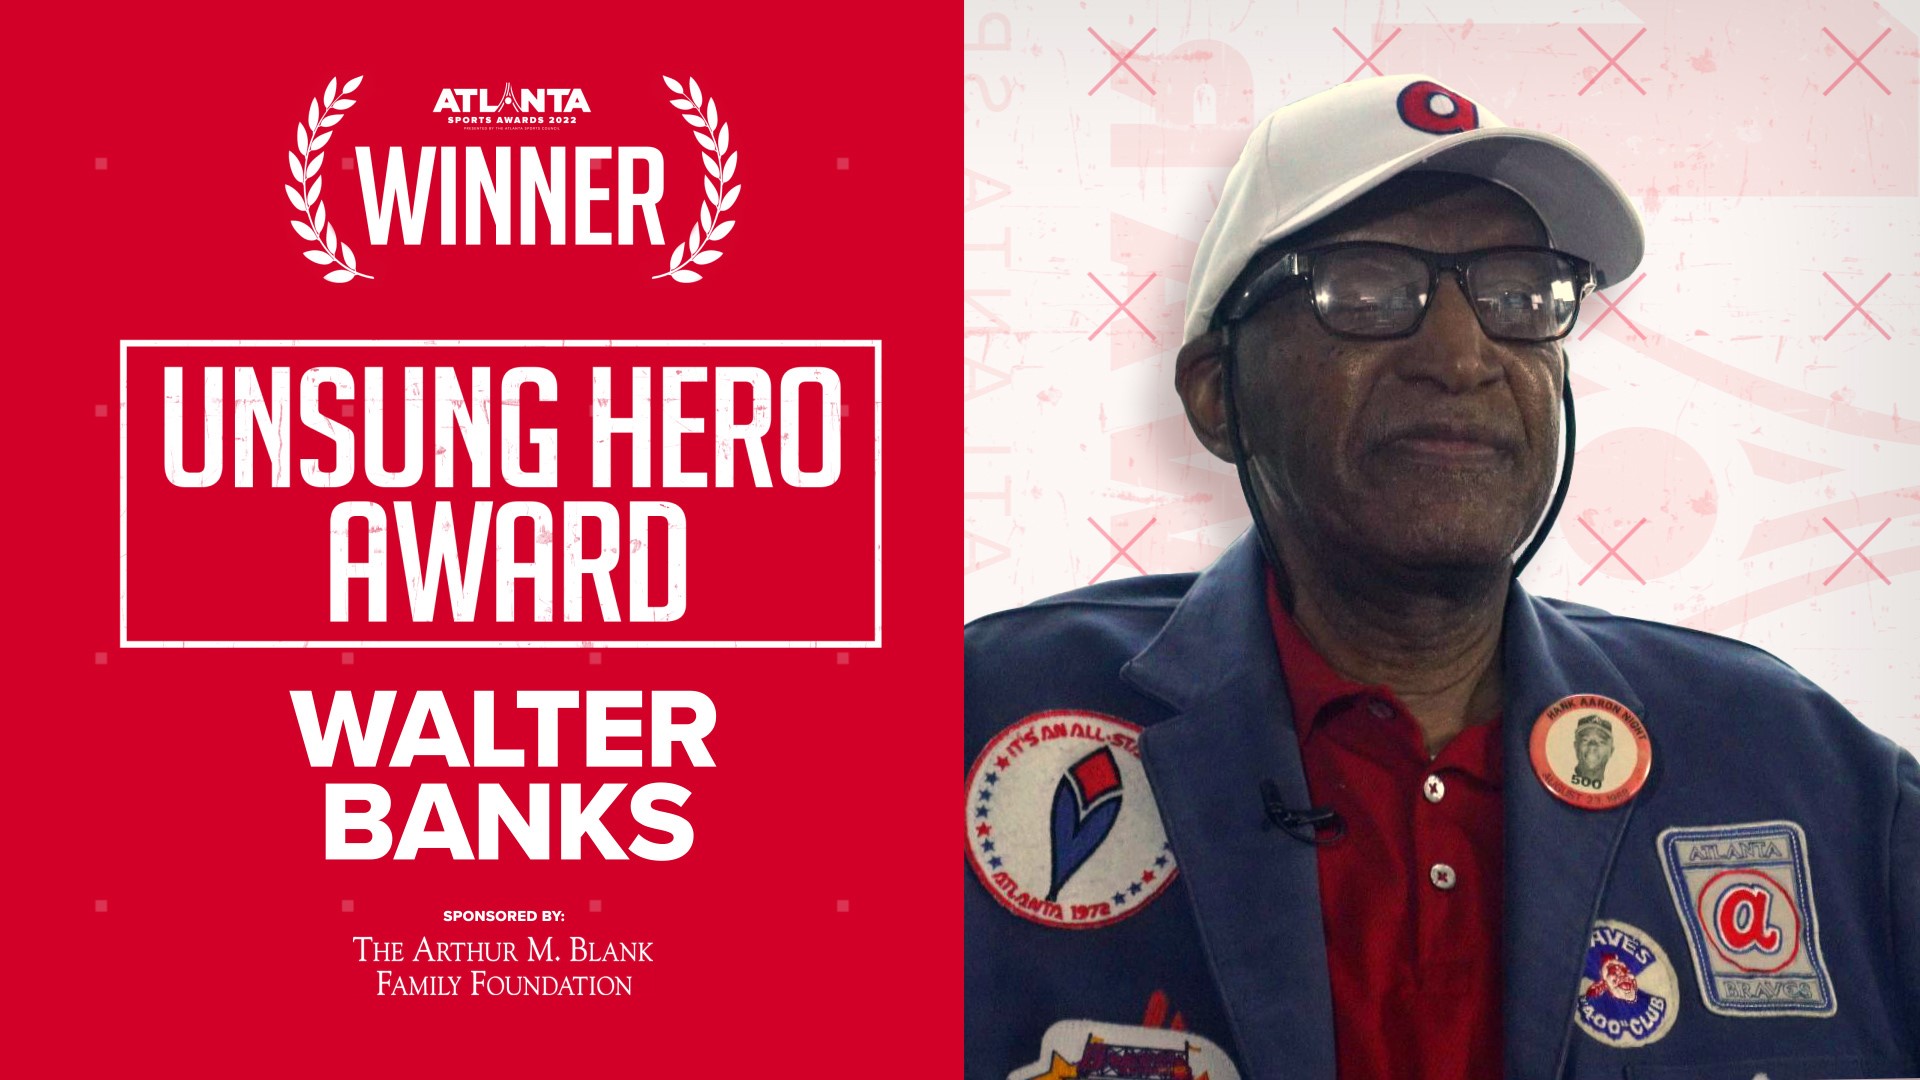 He has worked as an usher for the Atlanta Braves for 57 years.